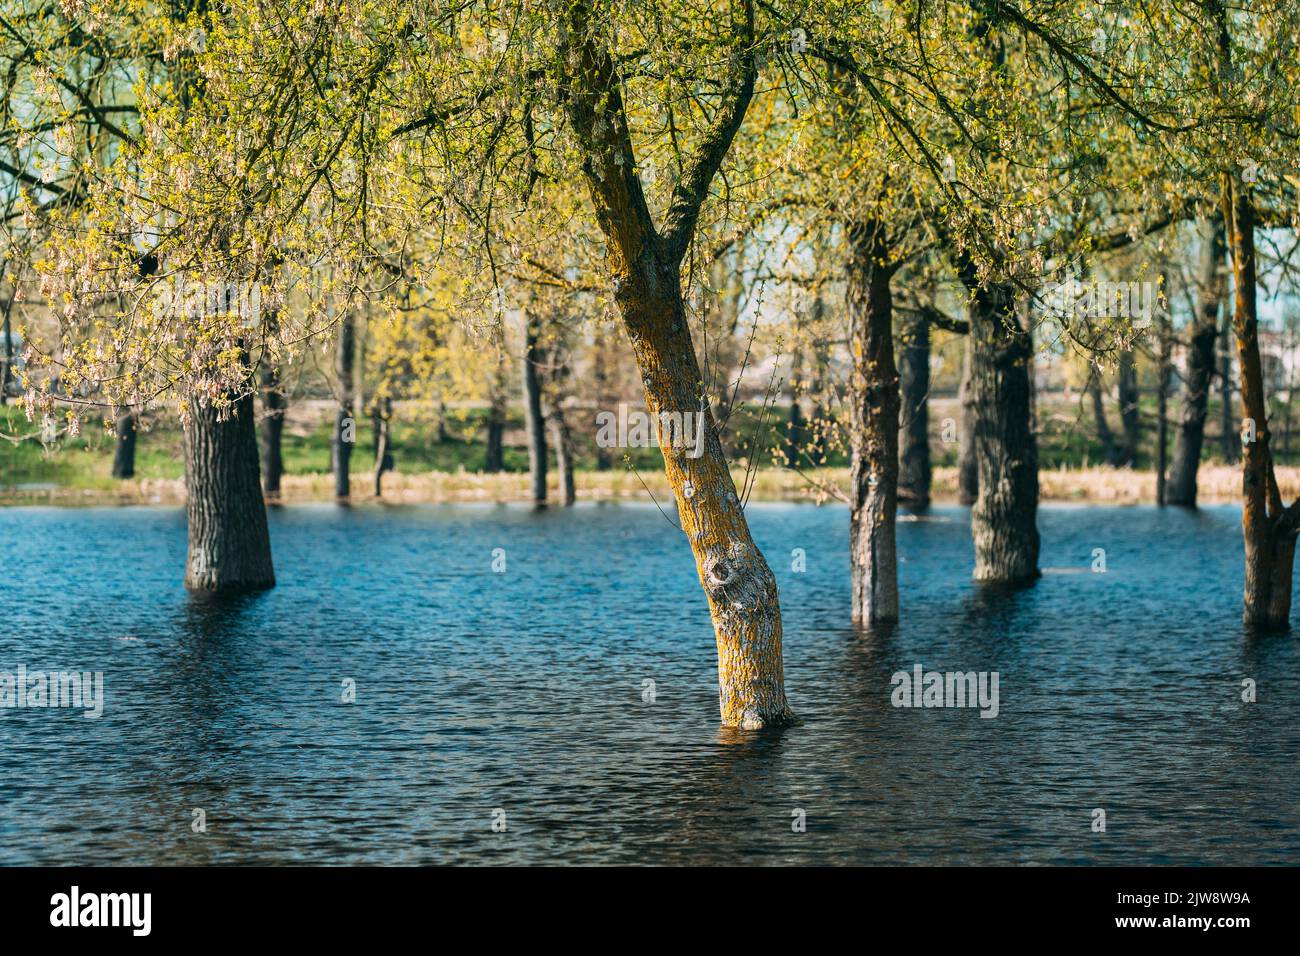 Trees That Standing In Water During Spring Flood Floodwaters. Ripples On Water. Water Deluge During A Spring Flood. Inundation River. Flood Natural Stock Photo